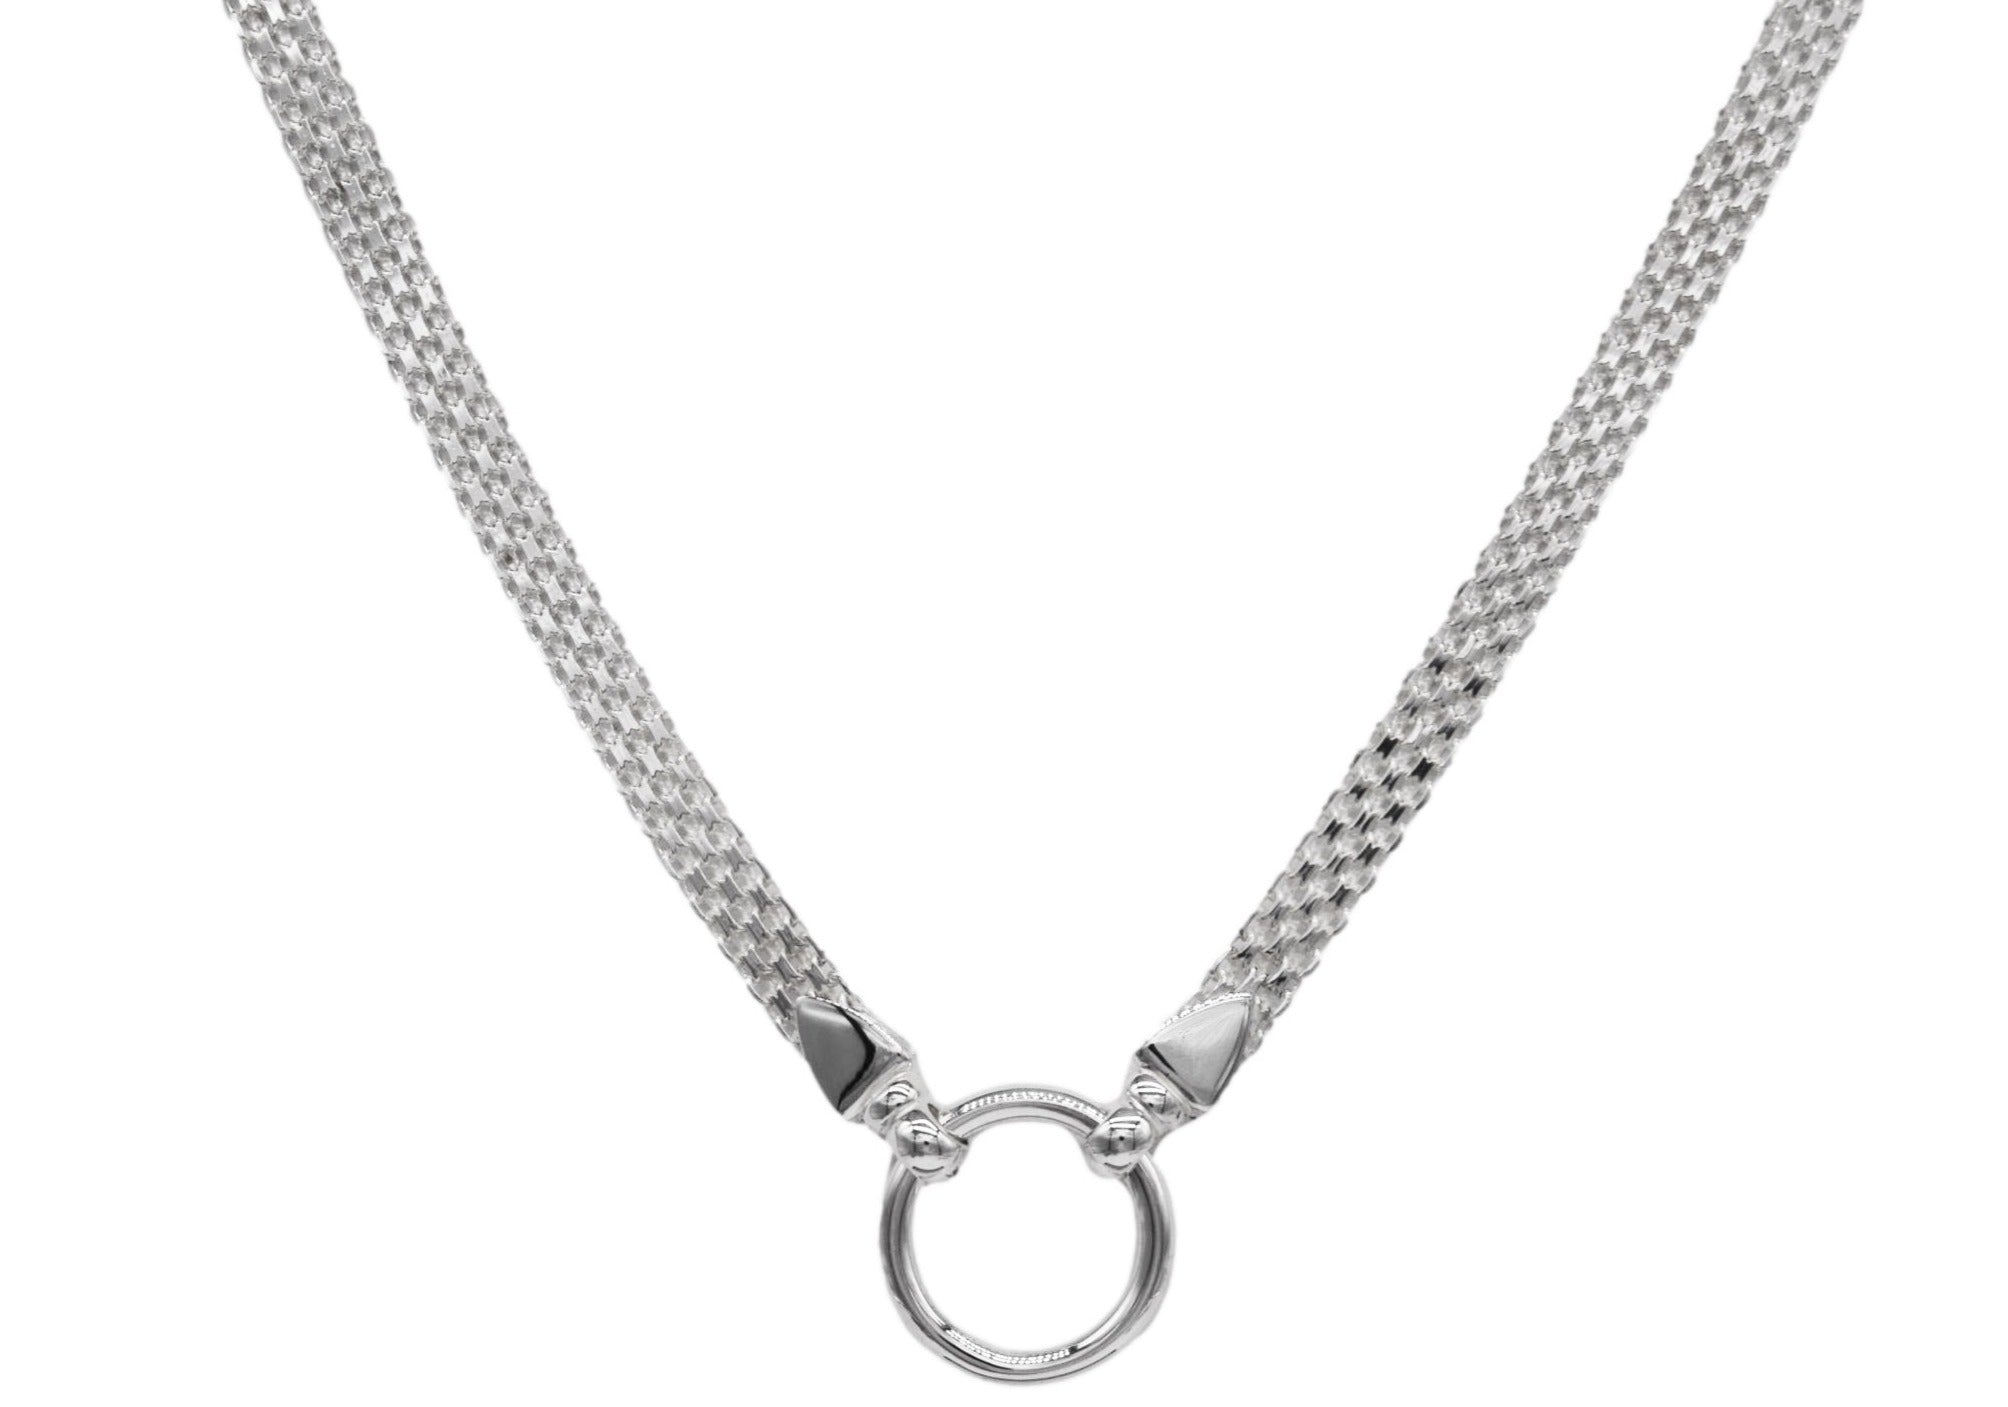 BDSM Locking Day Collar Jewelry Necklace of Lock and O ring with large sterling bell available in solid 316L Stainless Steel or 925 sterling silver shown on a white background